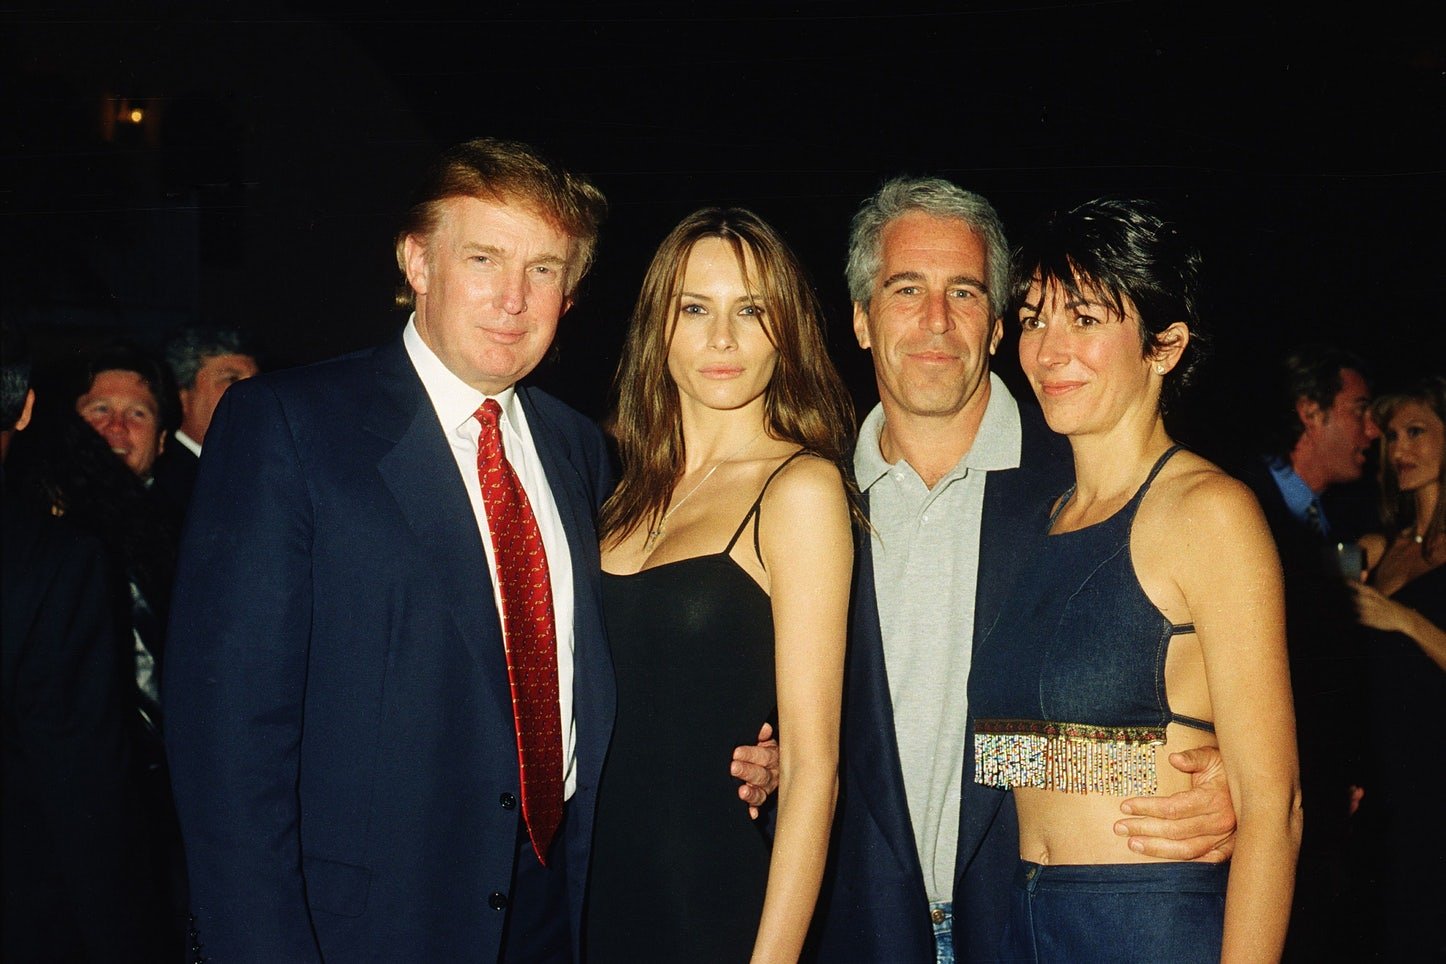 Wouldn't we be in better hands if the guy NOT pictured with a Pedophile was our President? Maybe just maybe, this guy isn't your friend? Go out, we dare you, see for yourself. 